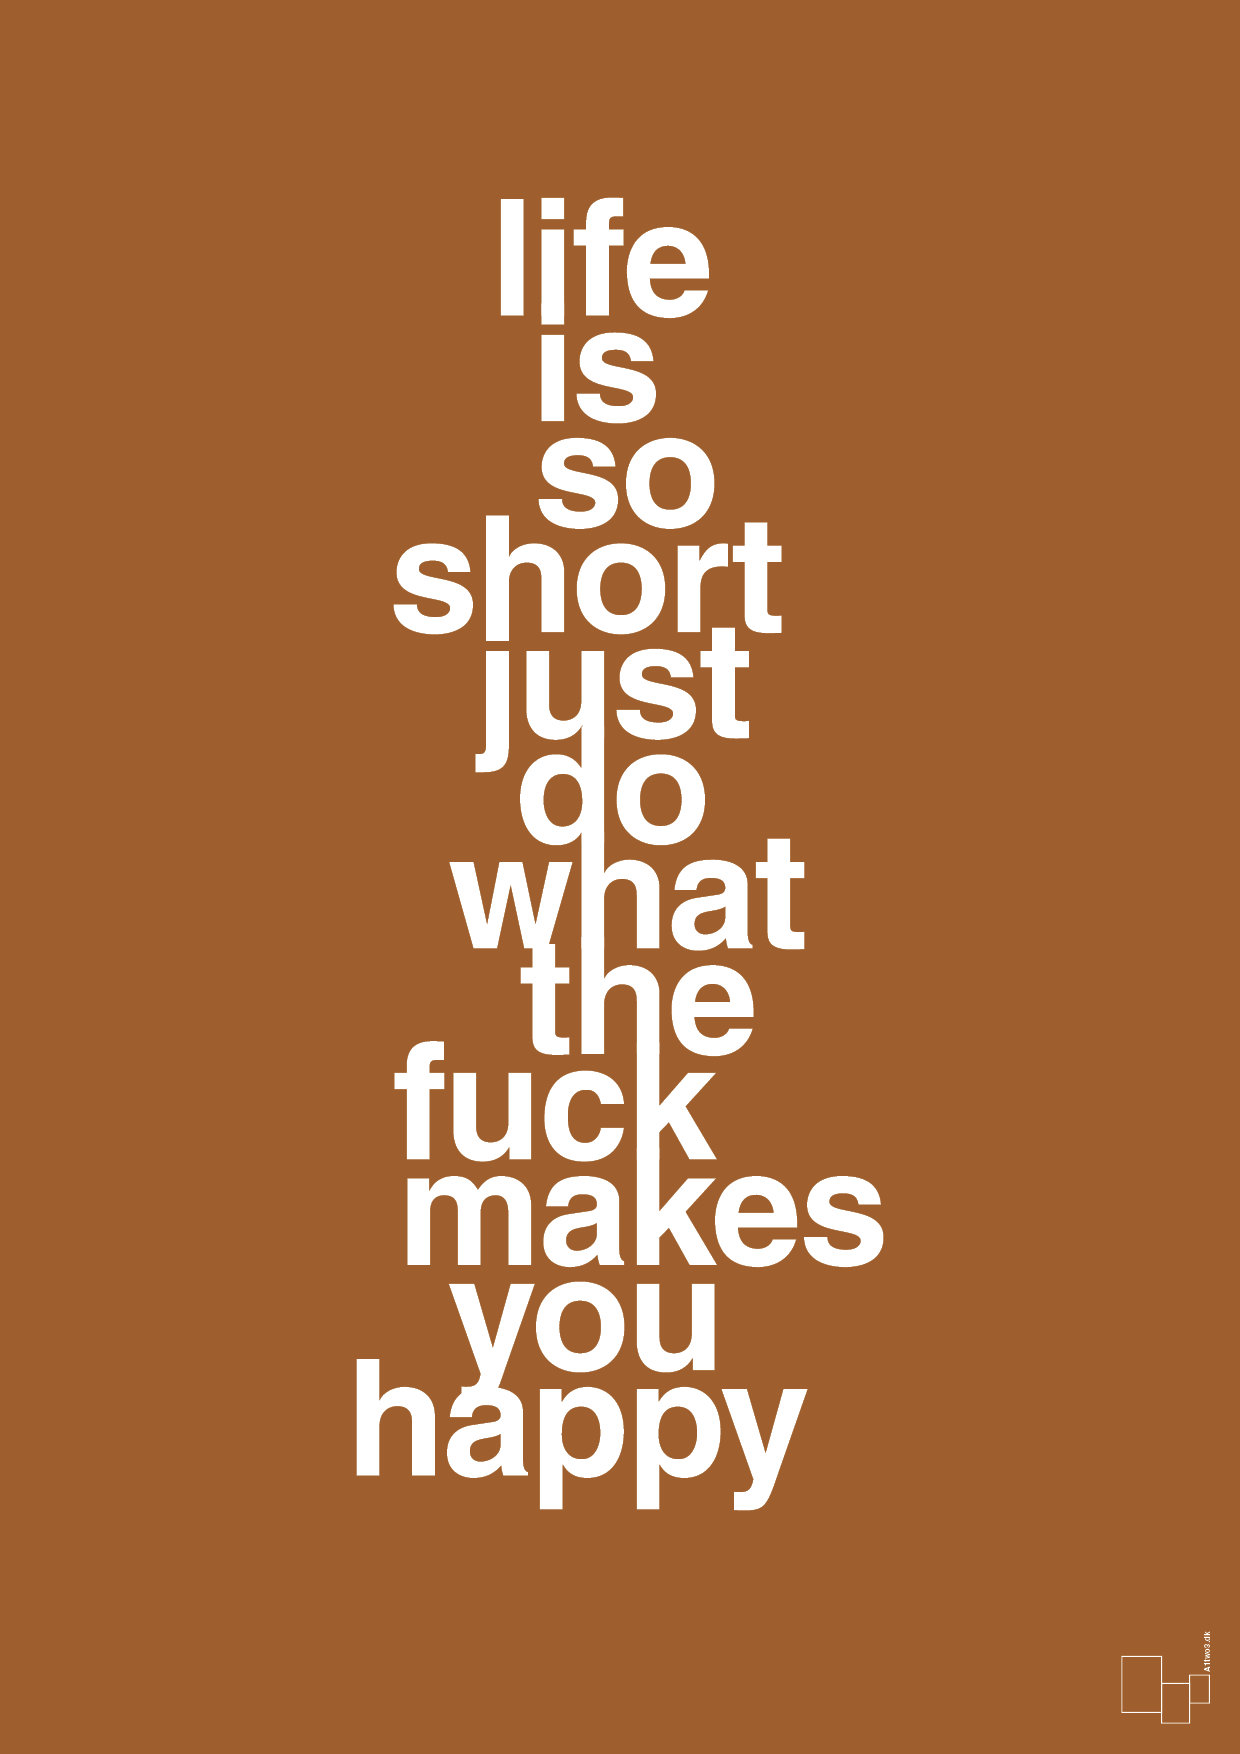 life is so short just do what the fuck makes you happy - Plakat med Ordsprog i Cognac